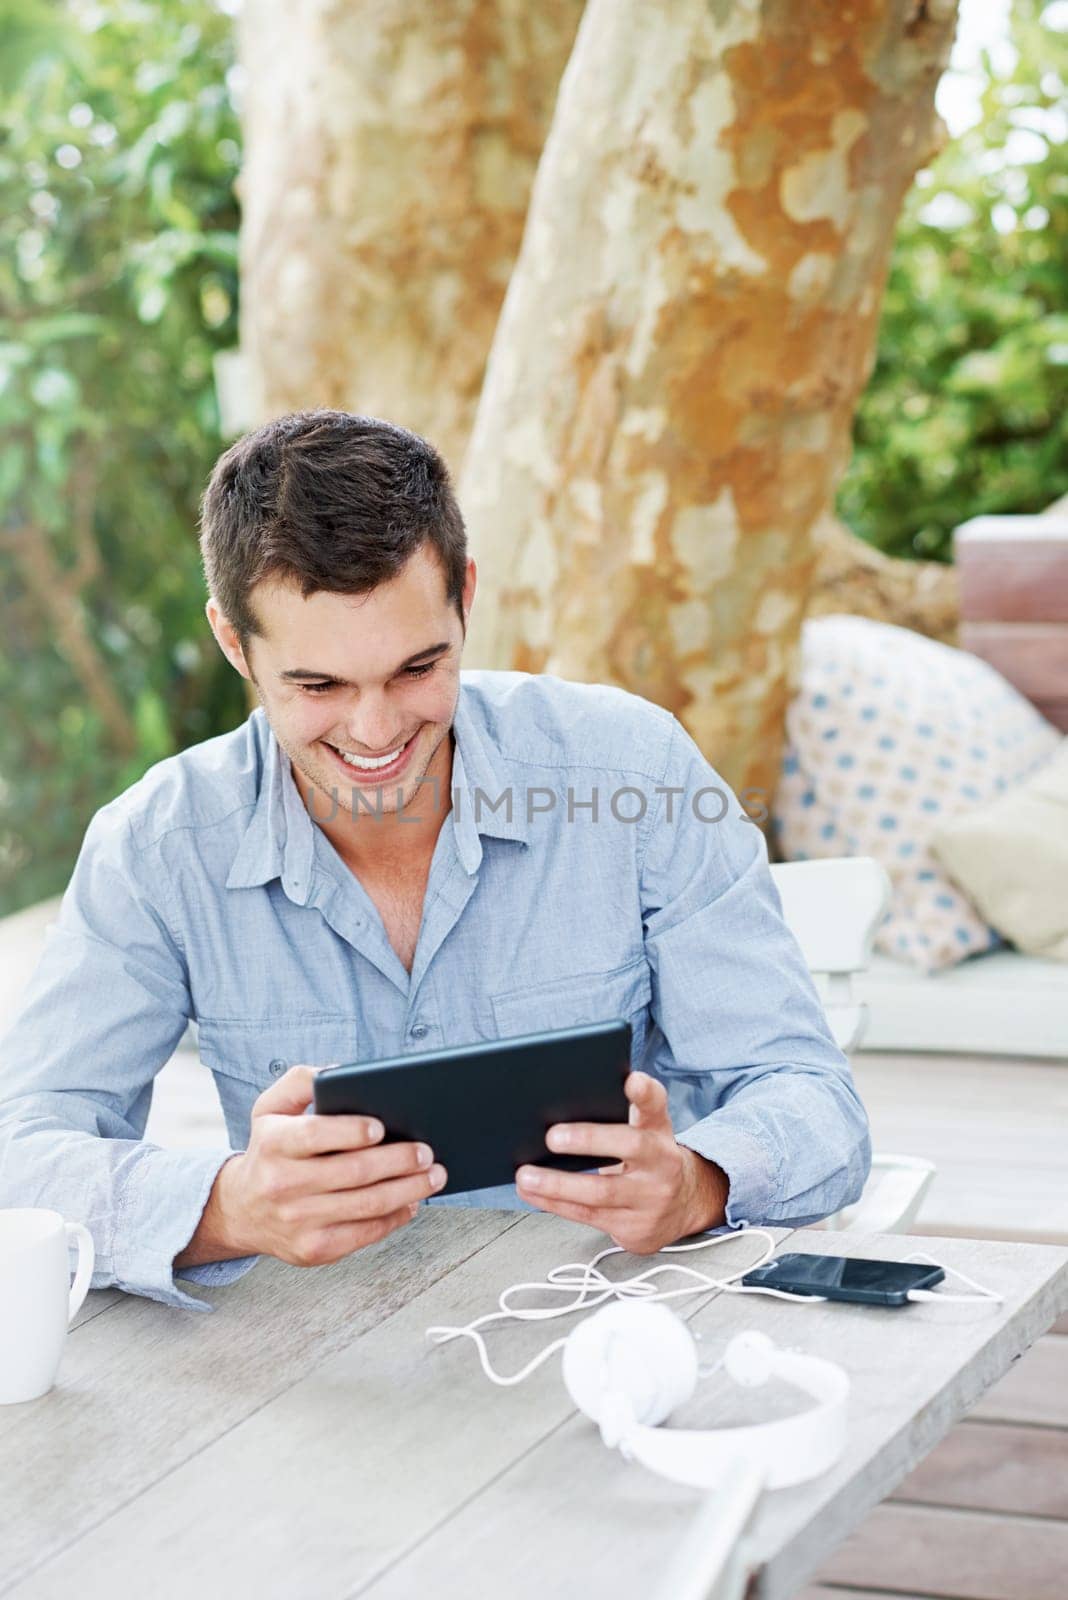 Internet, smile and man with tablet on patio for networking, communication and social media. Happy, male person and desk with technology in garden for online search, digital streaming or information.